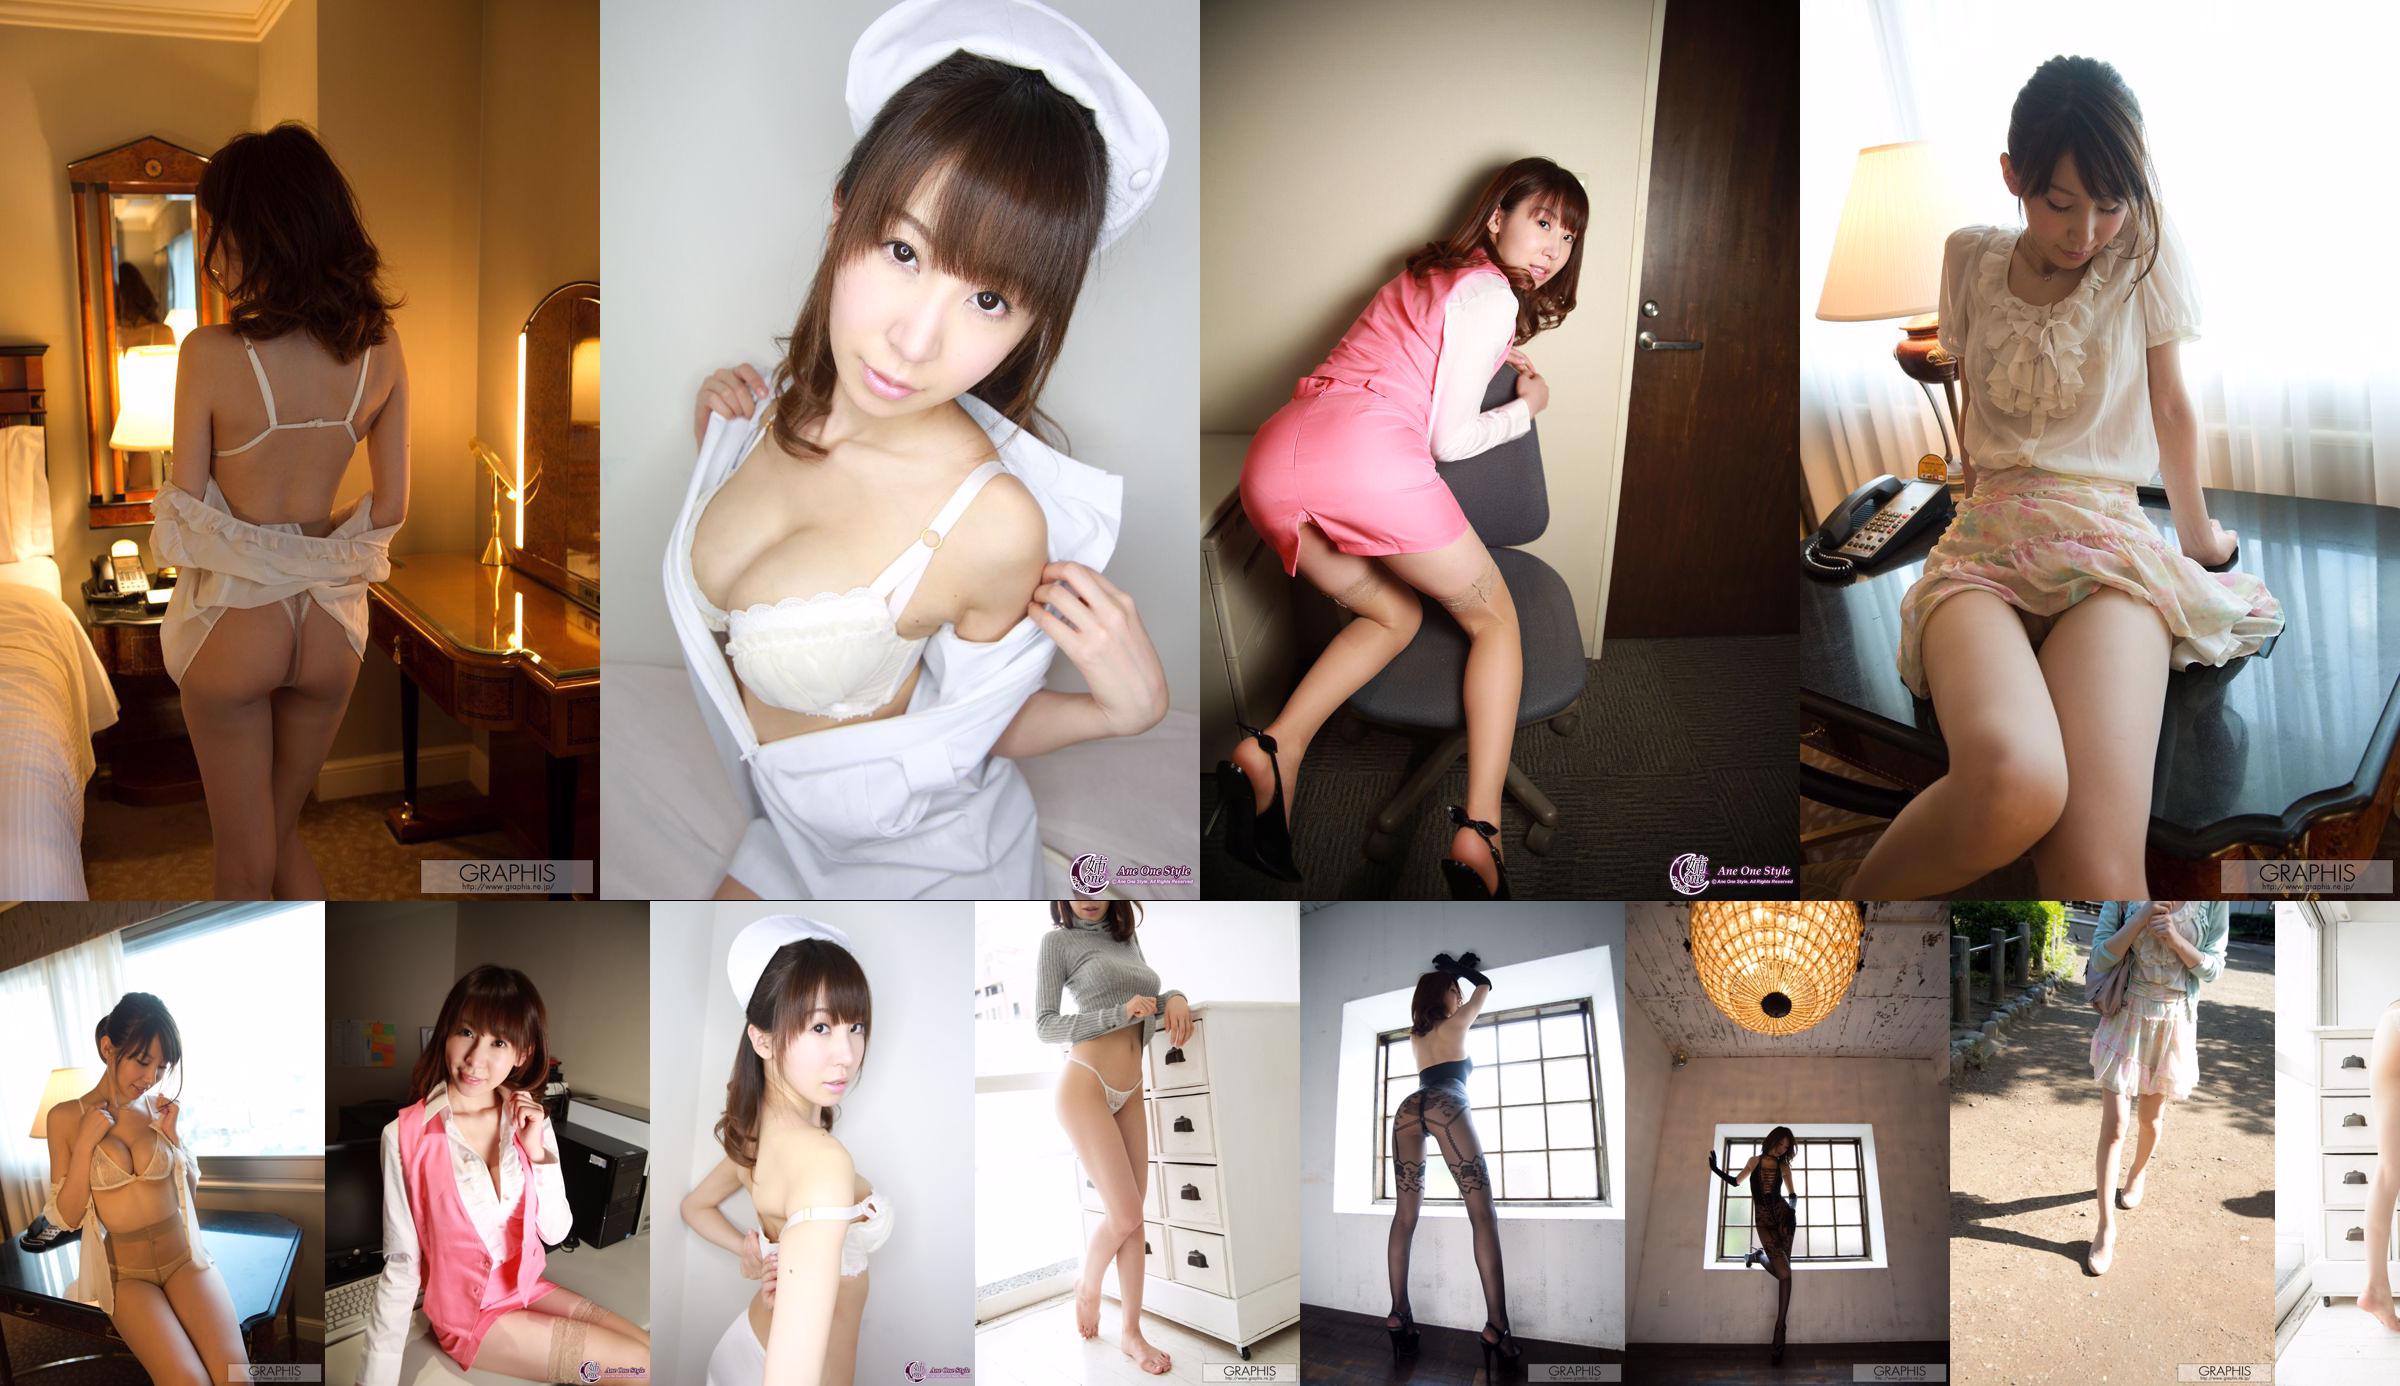 Chibana Meisa / Chibana Meisa [Graphis] First Gravure First take off daughter No.1e5846 Page 3